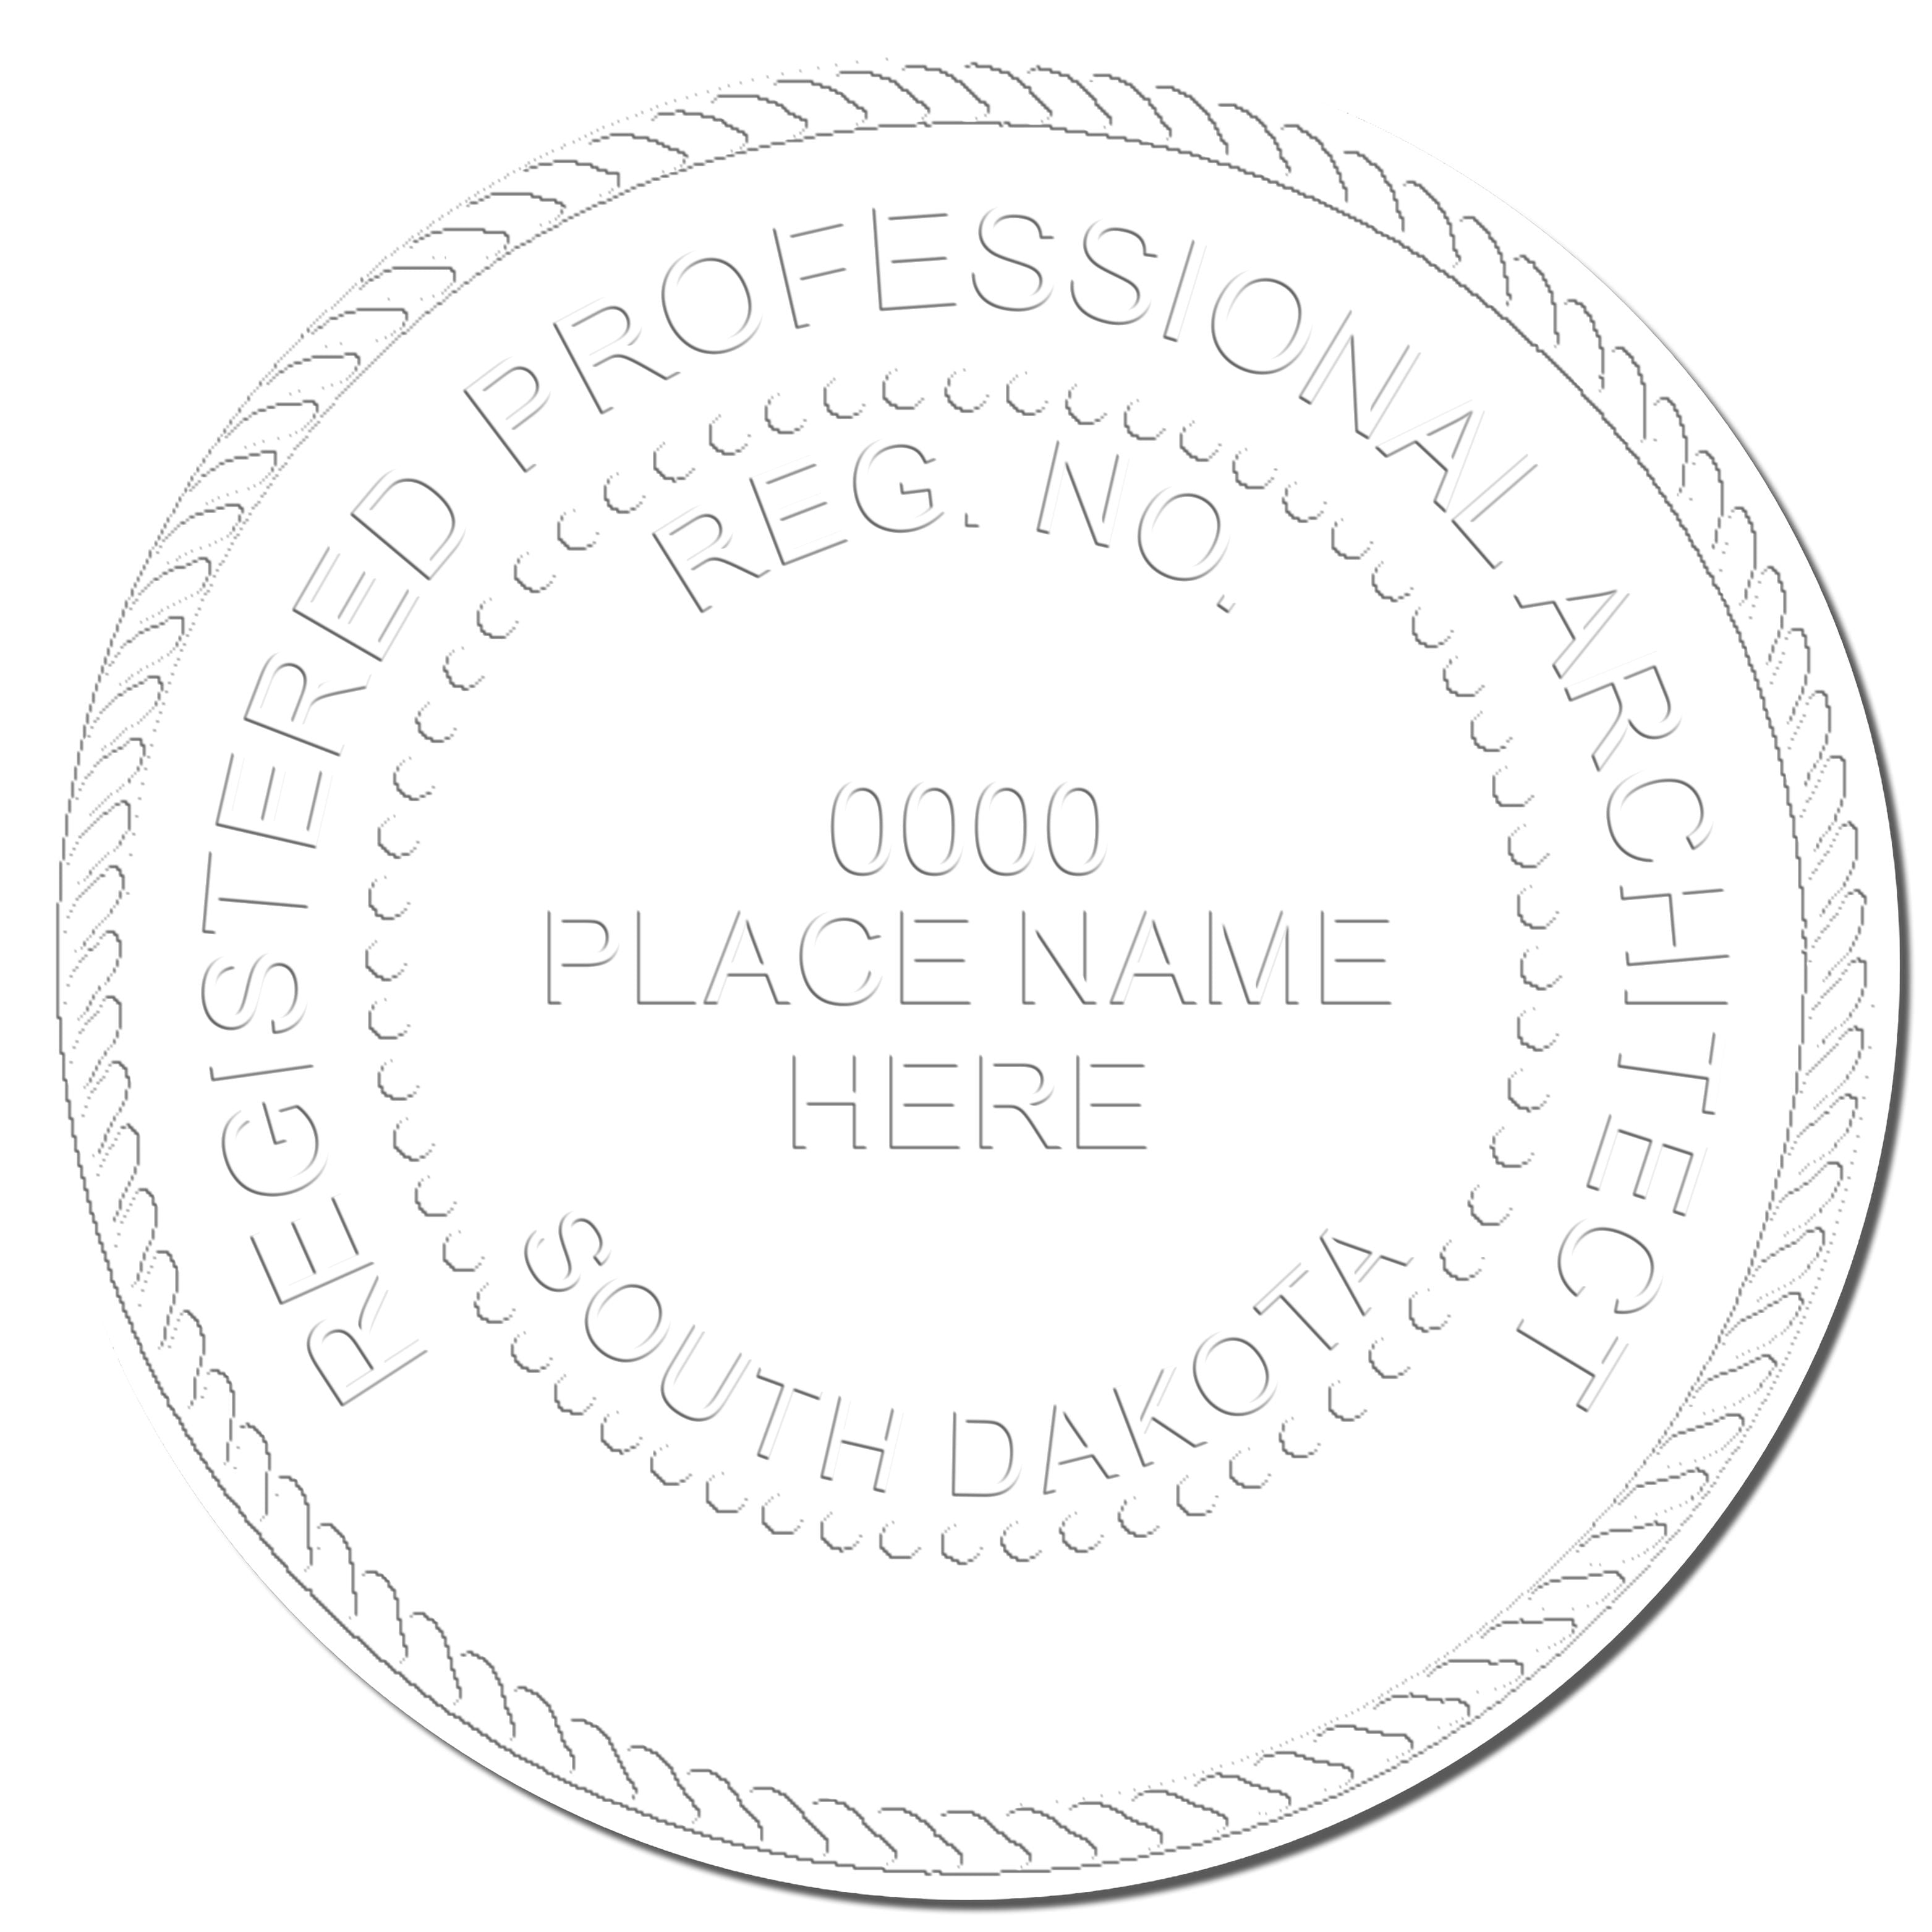 This paper is stamped with a sample imprint of the State of South Dakota Architectural Seal Embosser, signifying its quality and reliability.